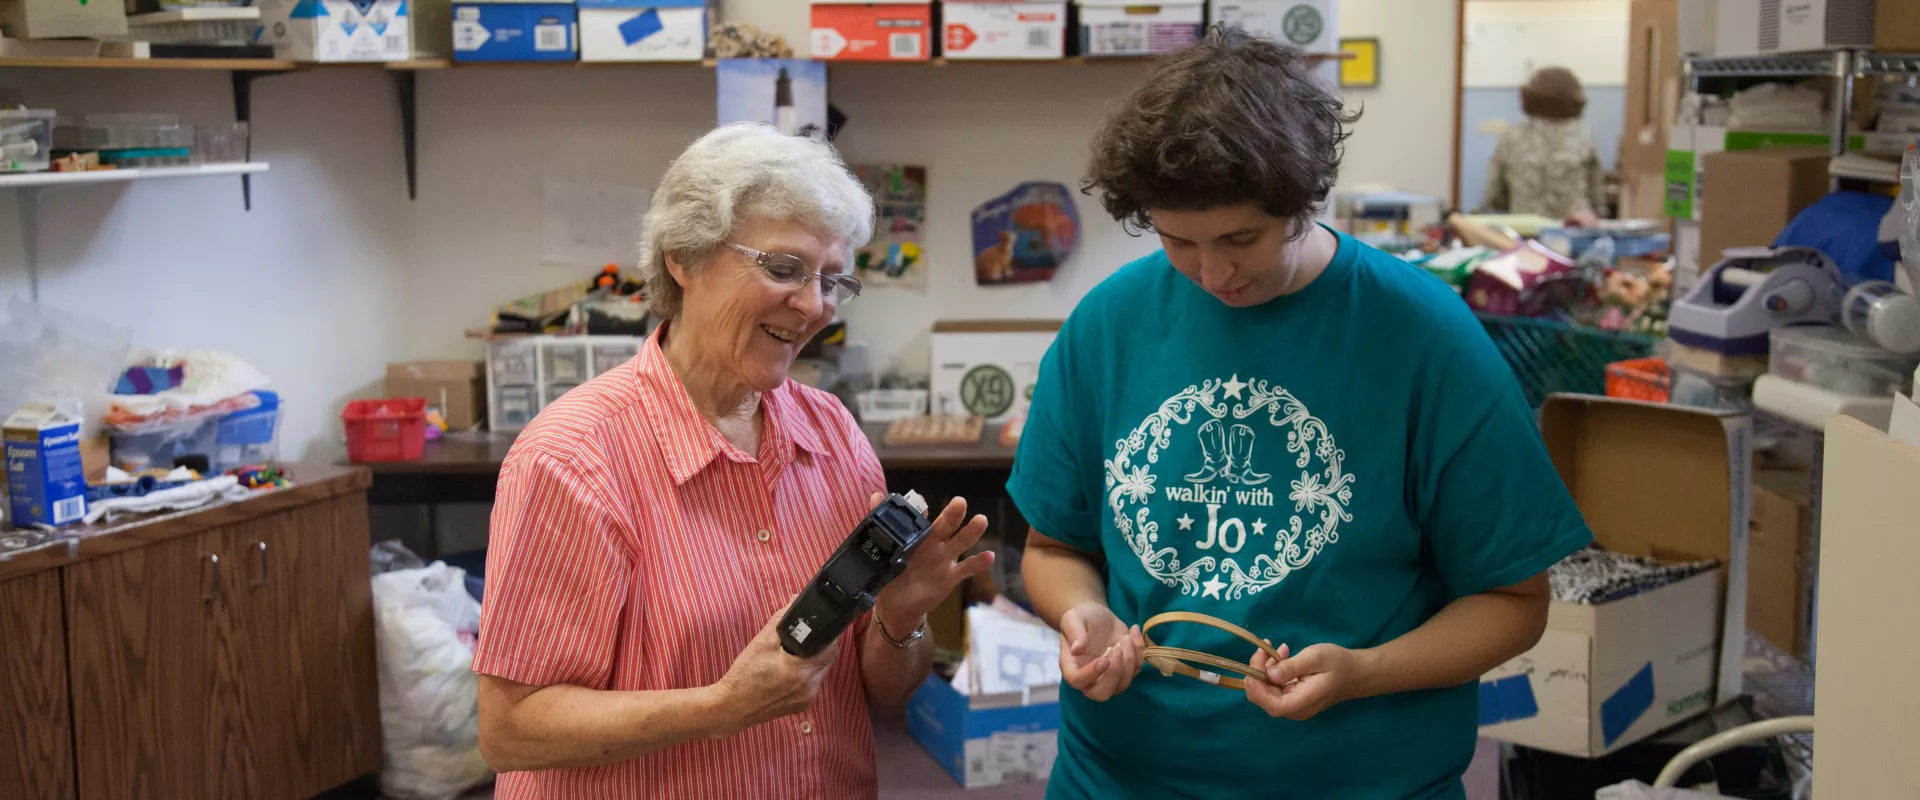 Two women volunteering with MCC Thrift, working with embroidery hoops.